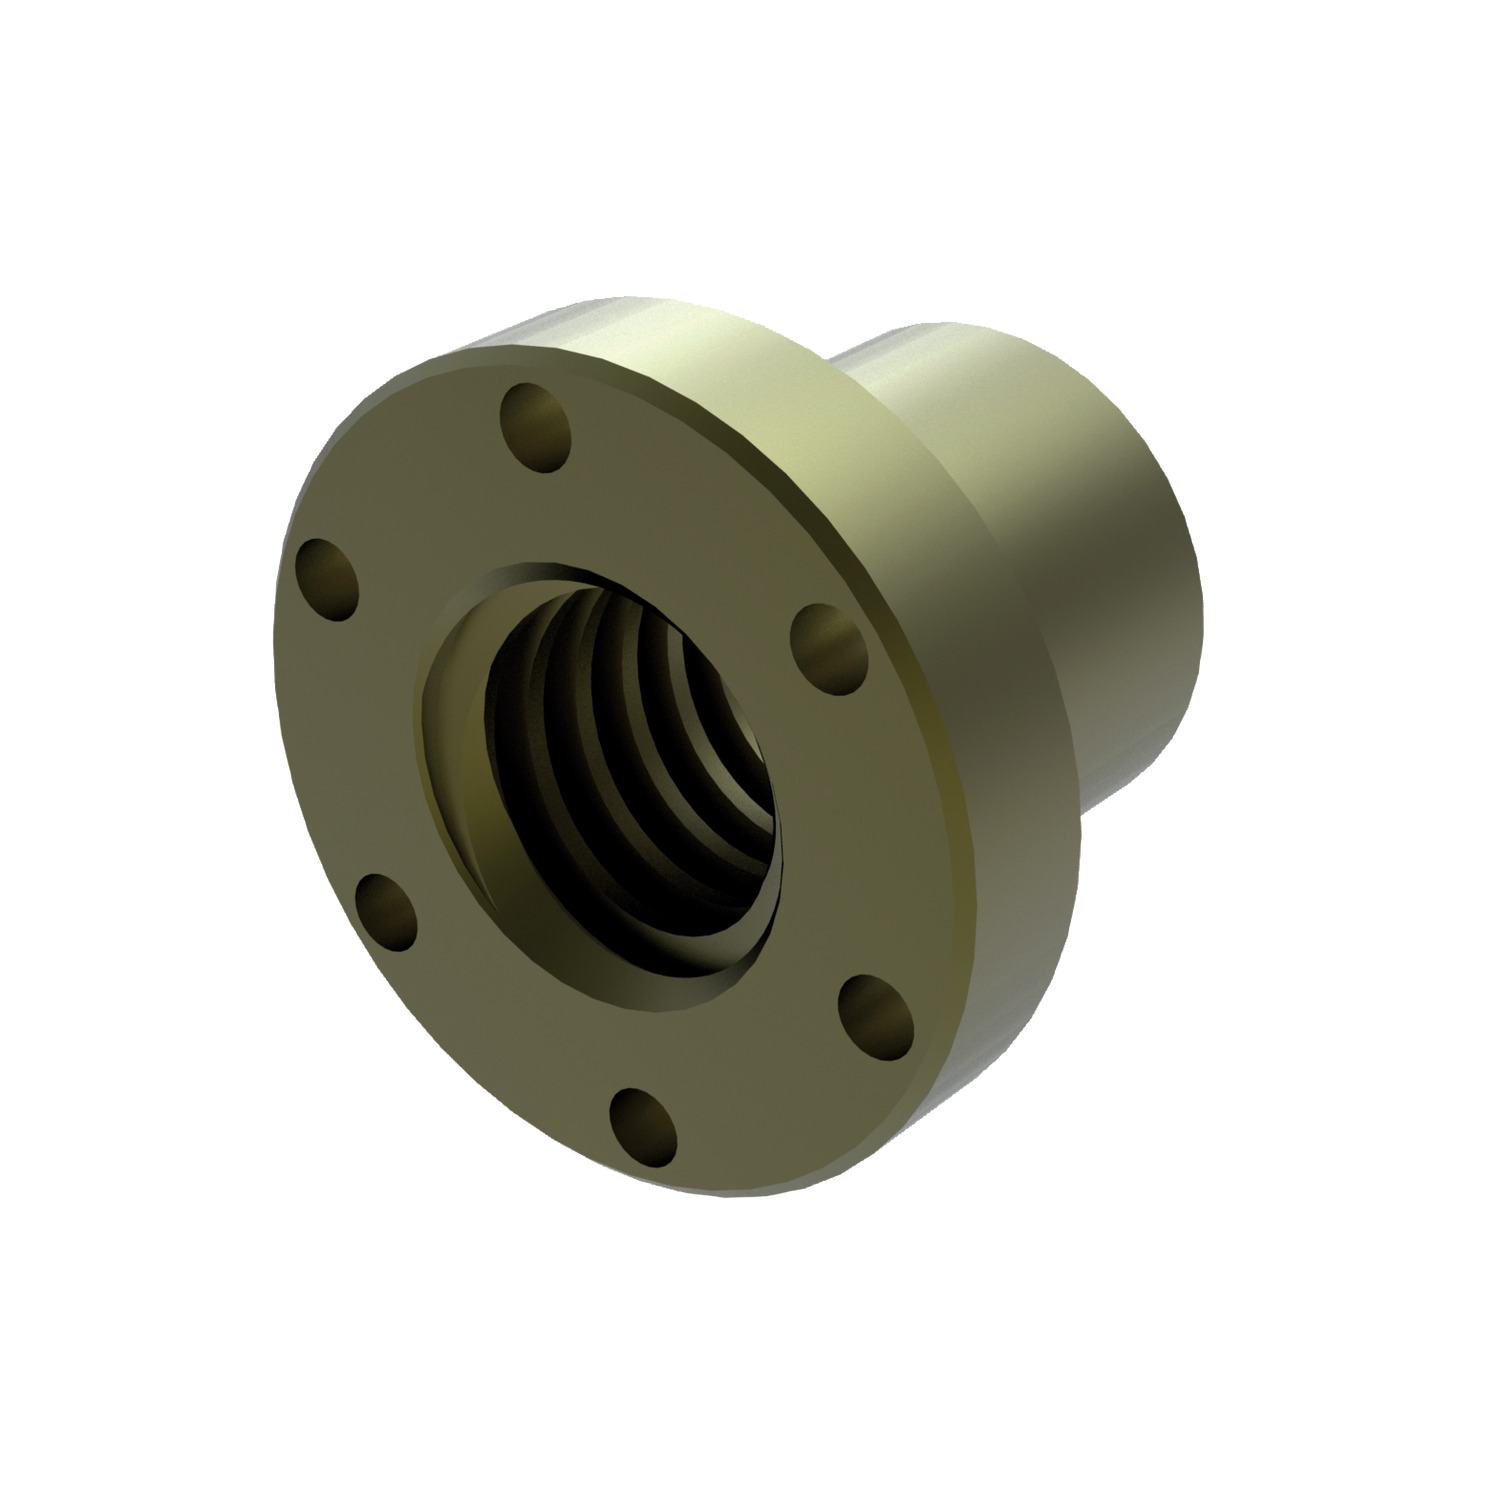 Product L1331, Flanged Bronze Nuts for lead screws / 